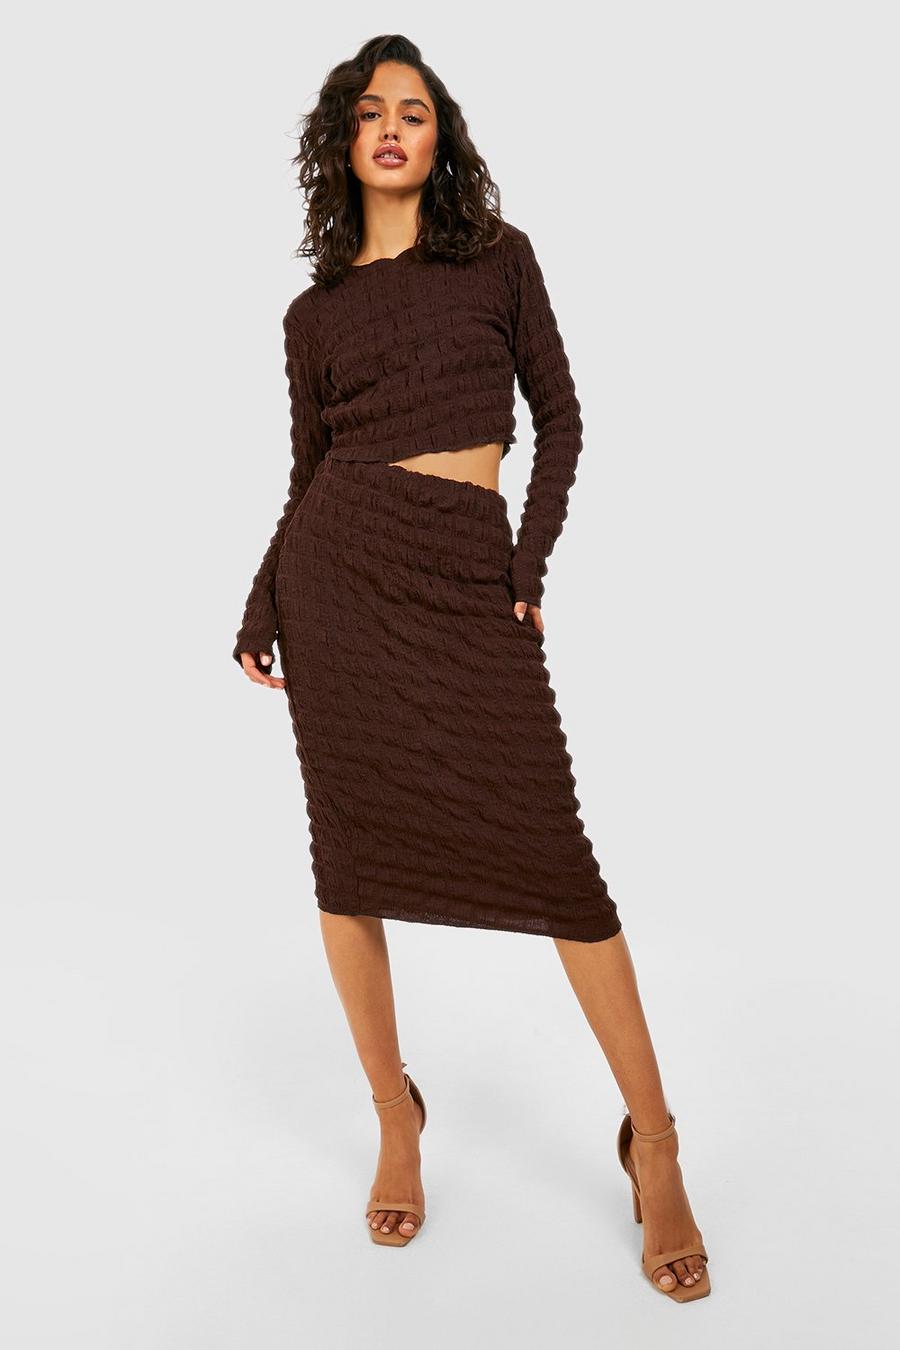 Chocolate brown Bubble Jersey Knit Backless Crop & Midi Skirt